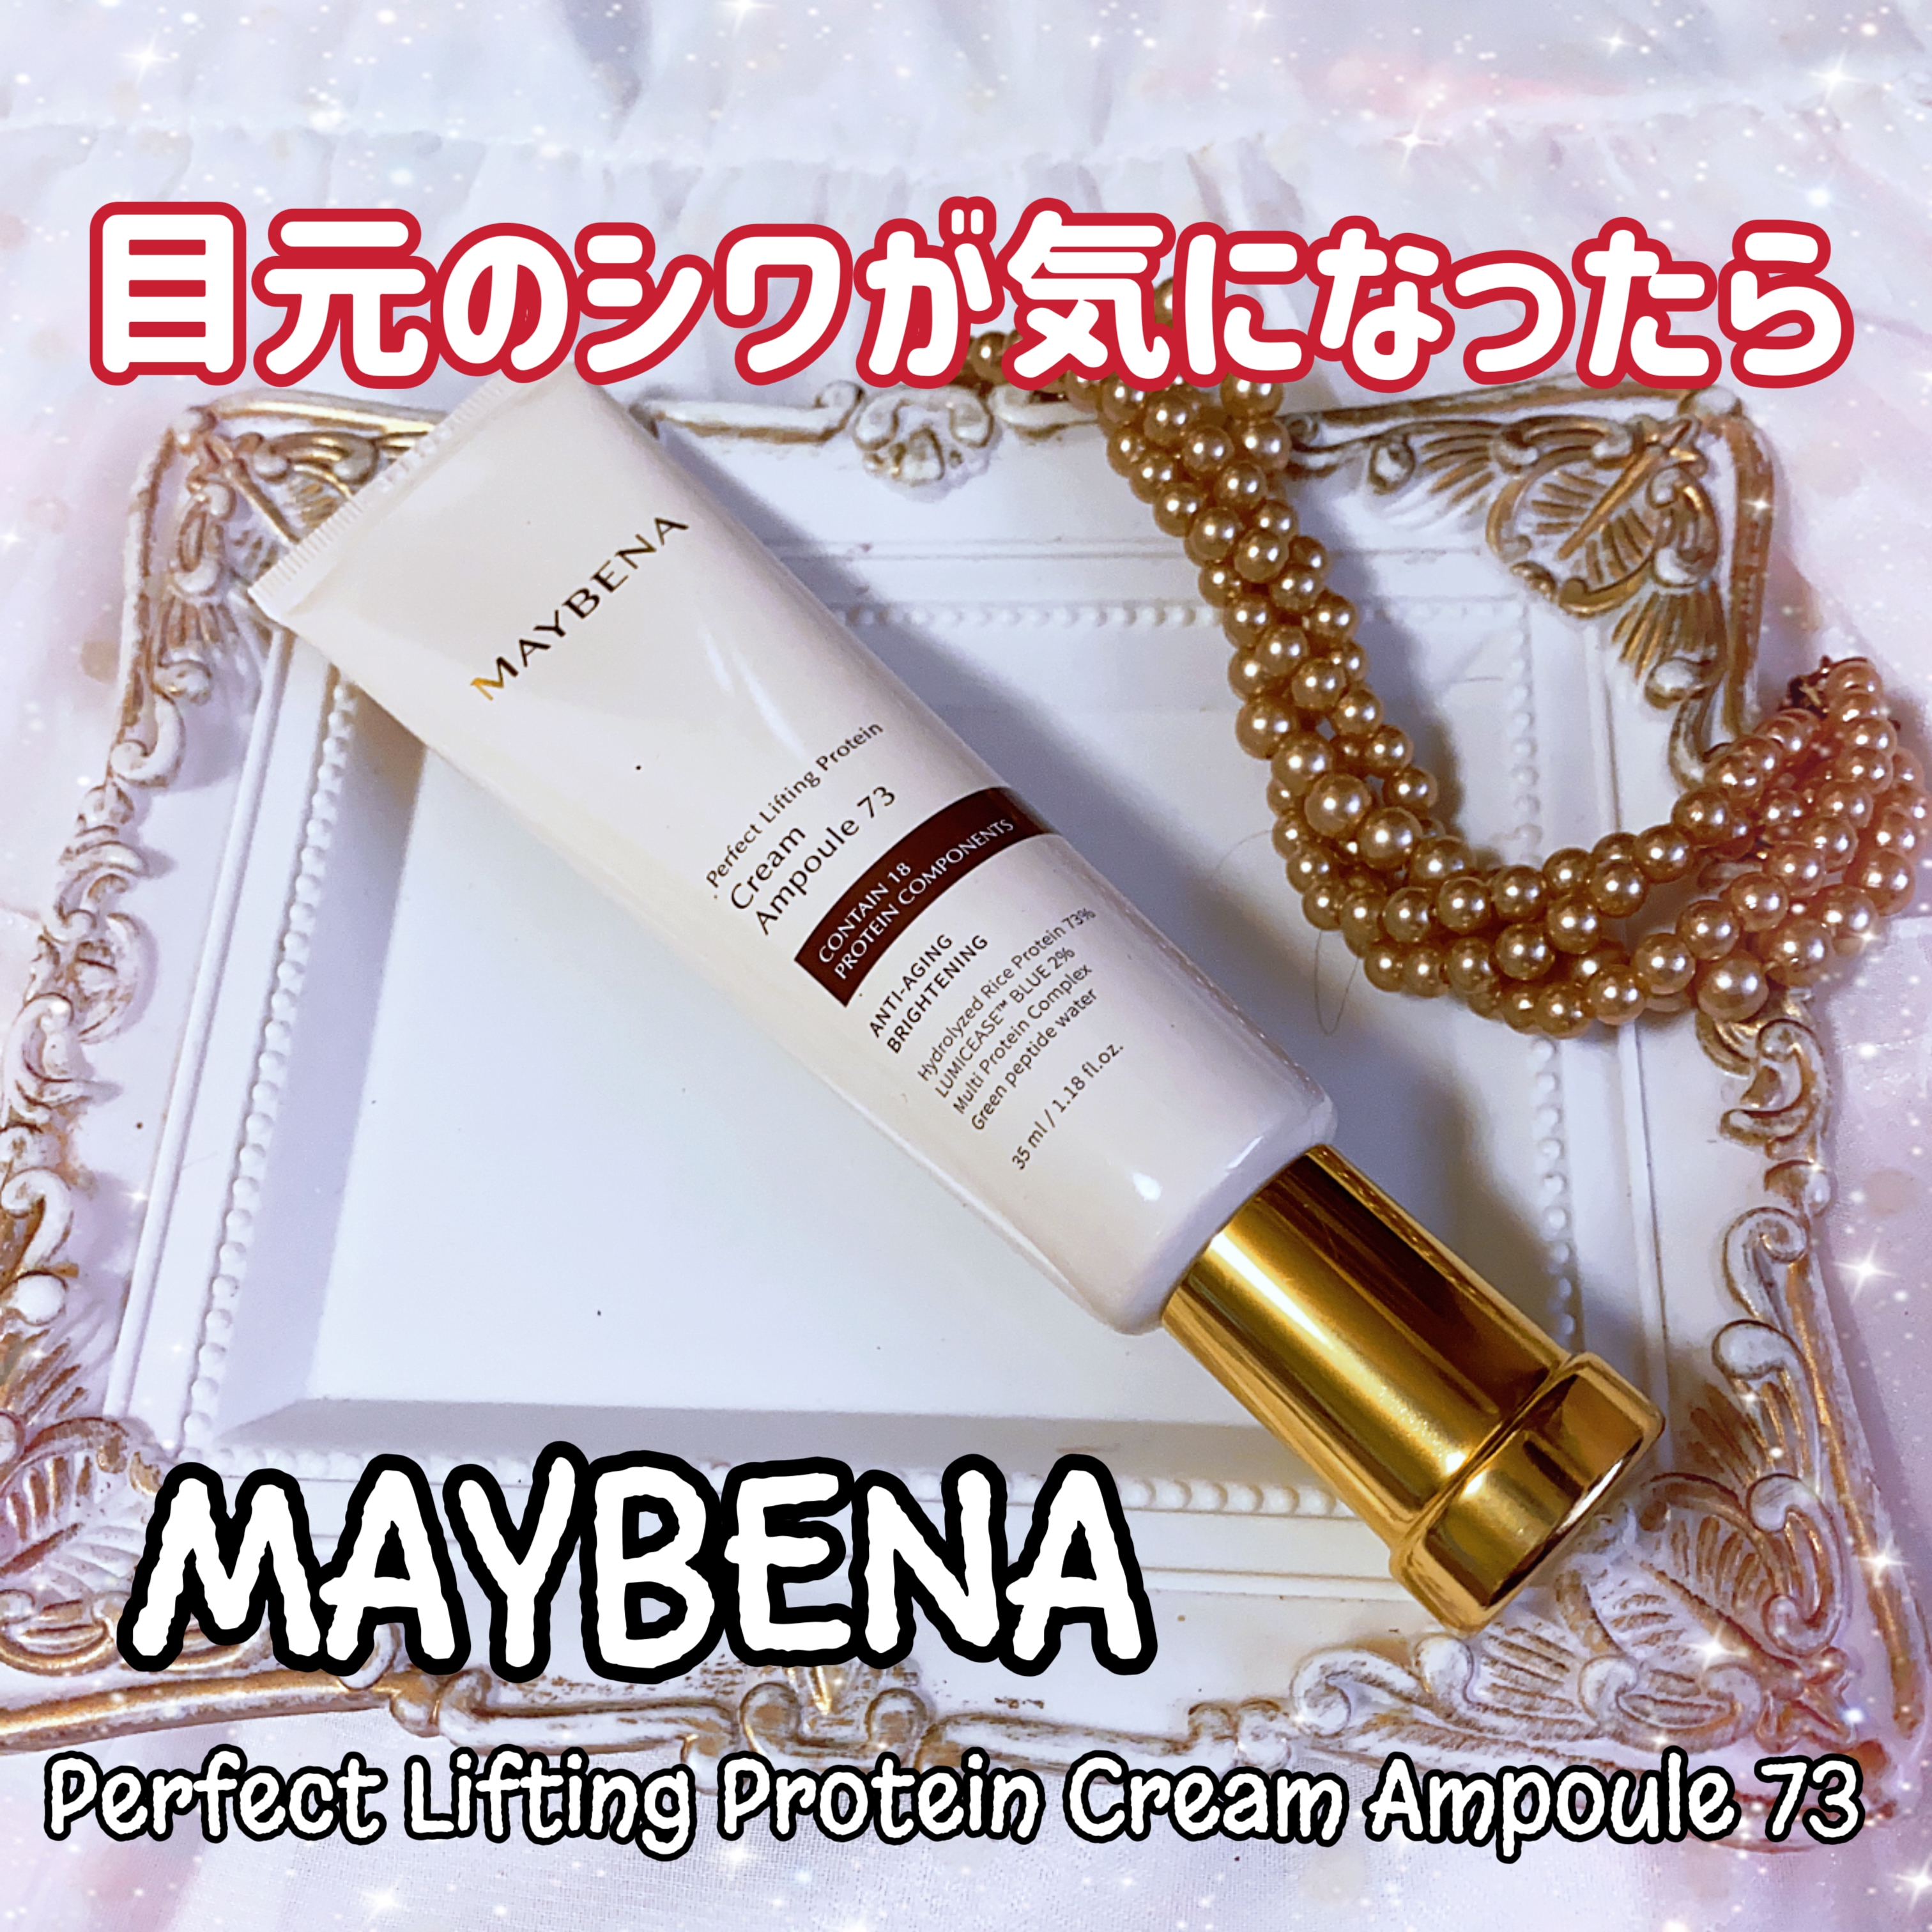 MAYBENA Perfect Lifting Protein Cream Ampoule 73を使った珈琲豆♡さんのクチコミ画像1